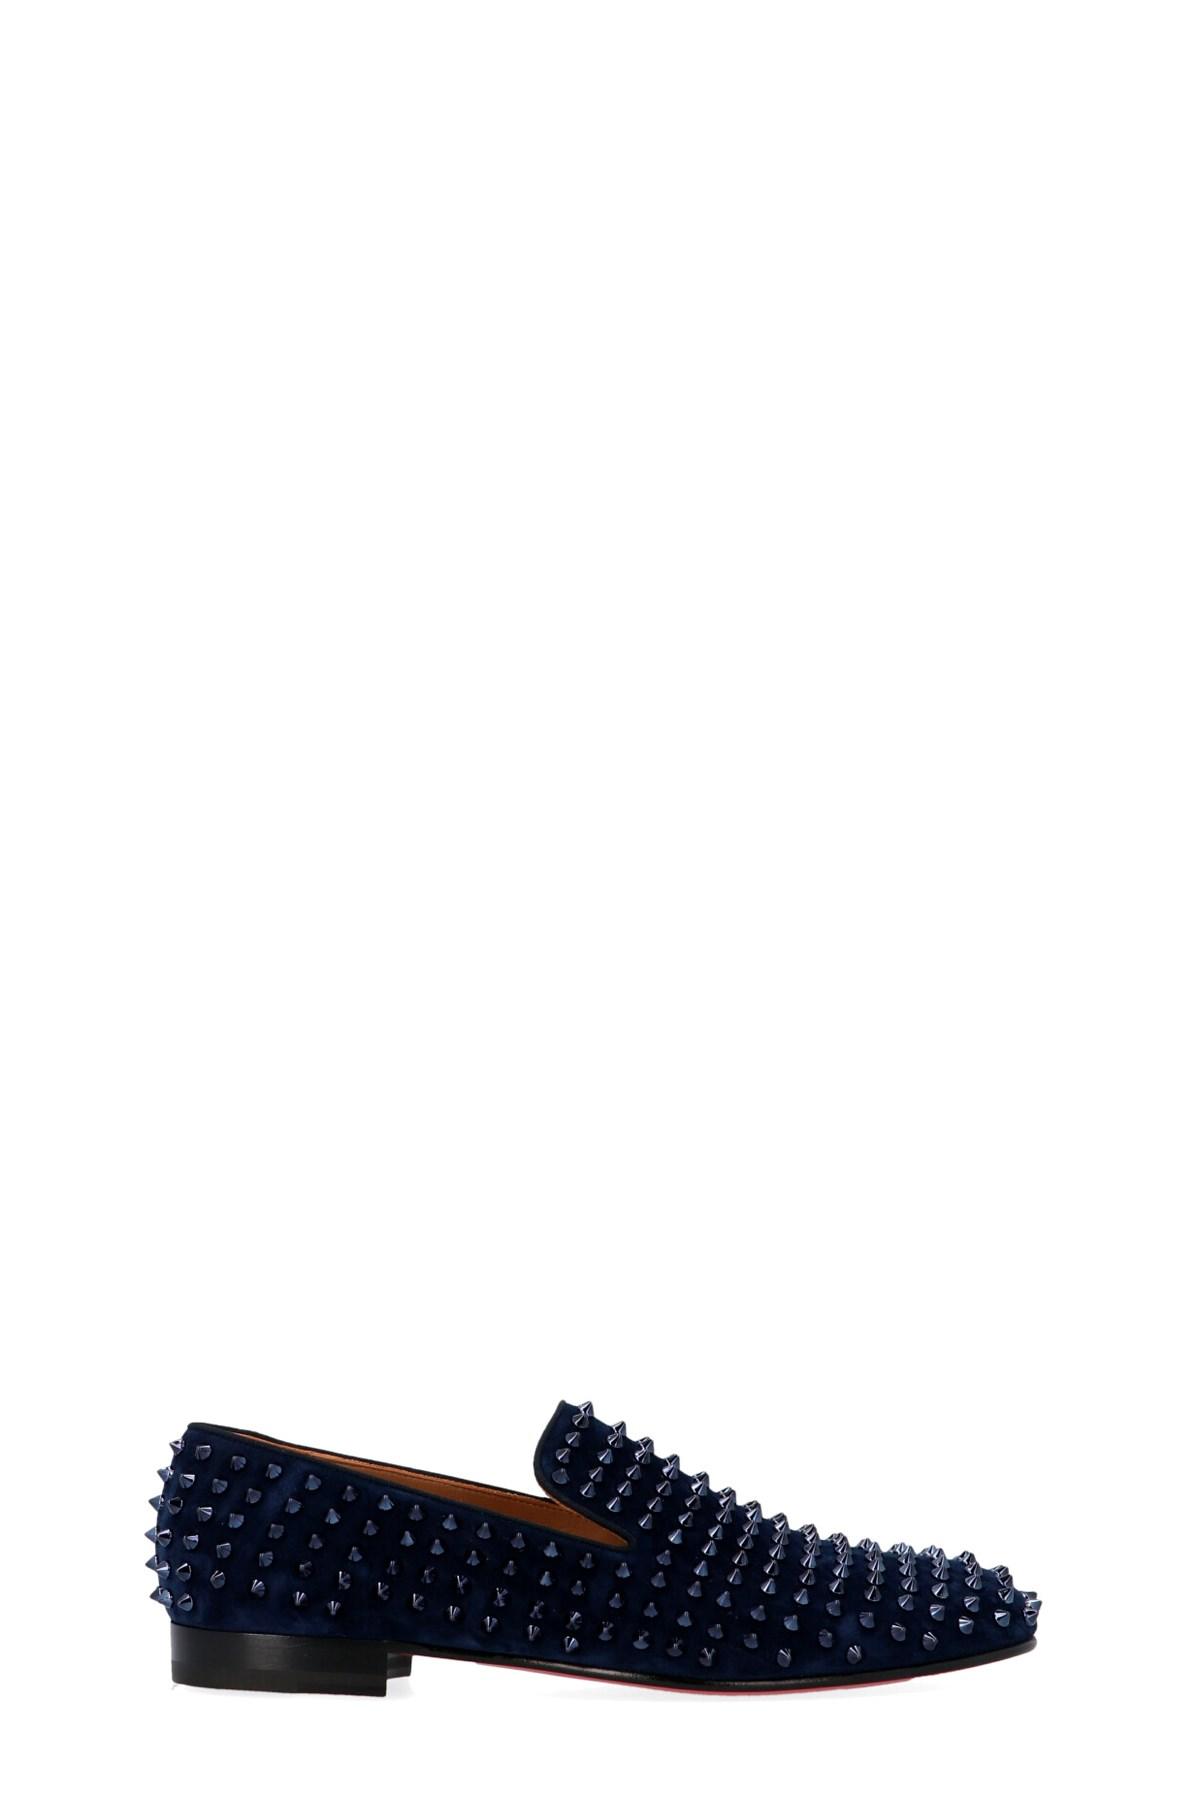 Louboutin Leather Rollerboy Spike Loafers in Blue for -